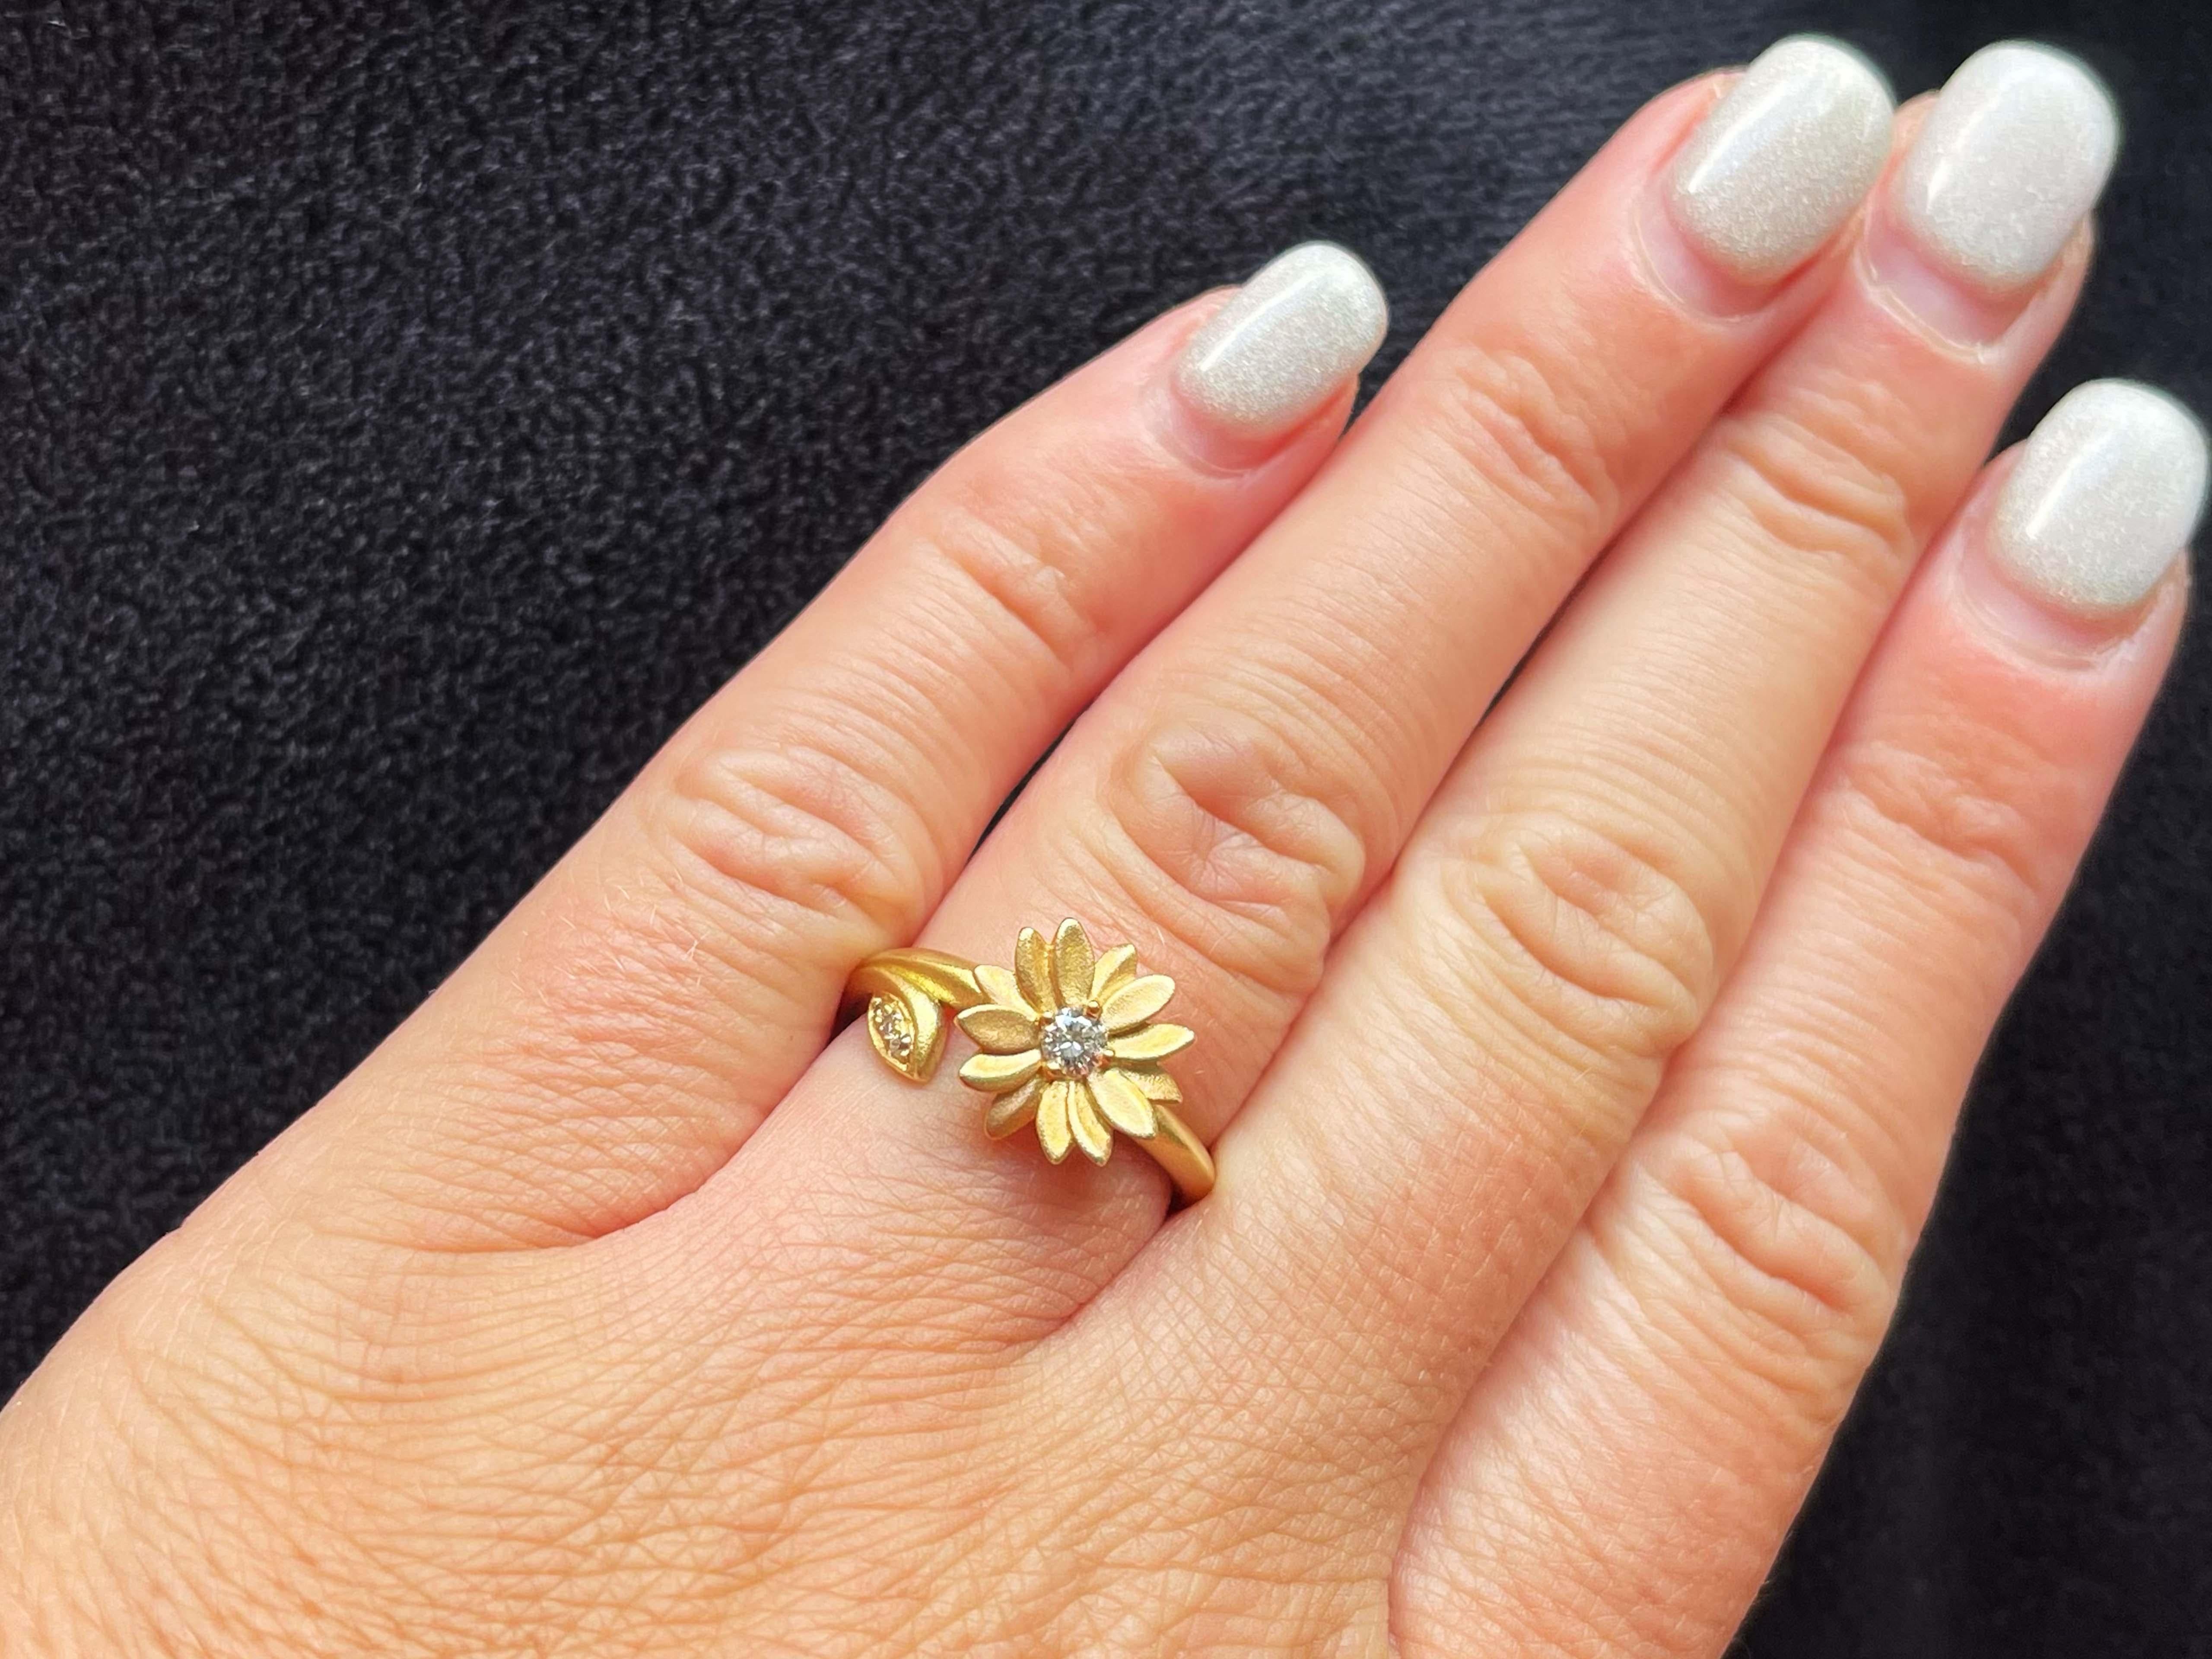 Item Specifications:

Metal: 18K Yellow Gold

Style: Statement Ring

Ring Size: 6.5 (resizing available for a fee)

Total Weight: 5.0 Grams
​
​Diamond Count: 4 

Diamond Carat Weight: 0.15

Diamond Color: G

Diamond Clarity: VS

Condition: Preowned,